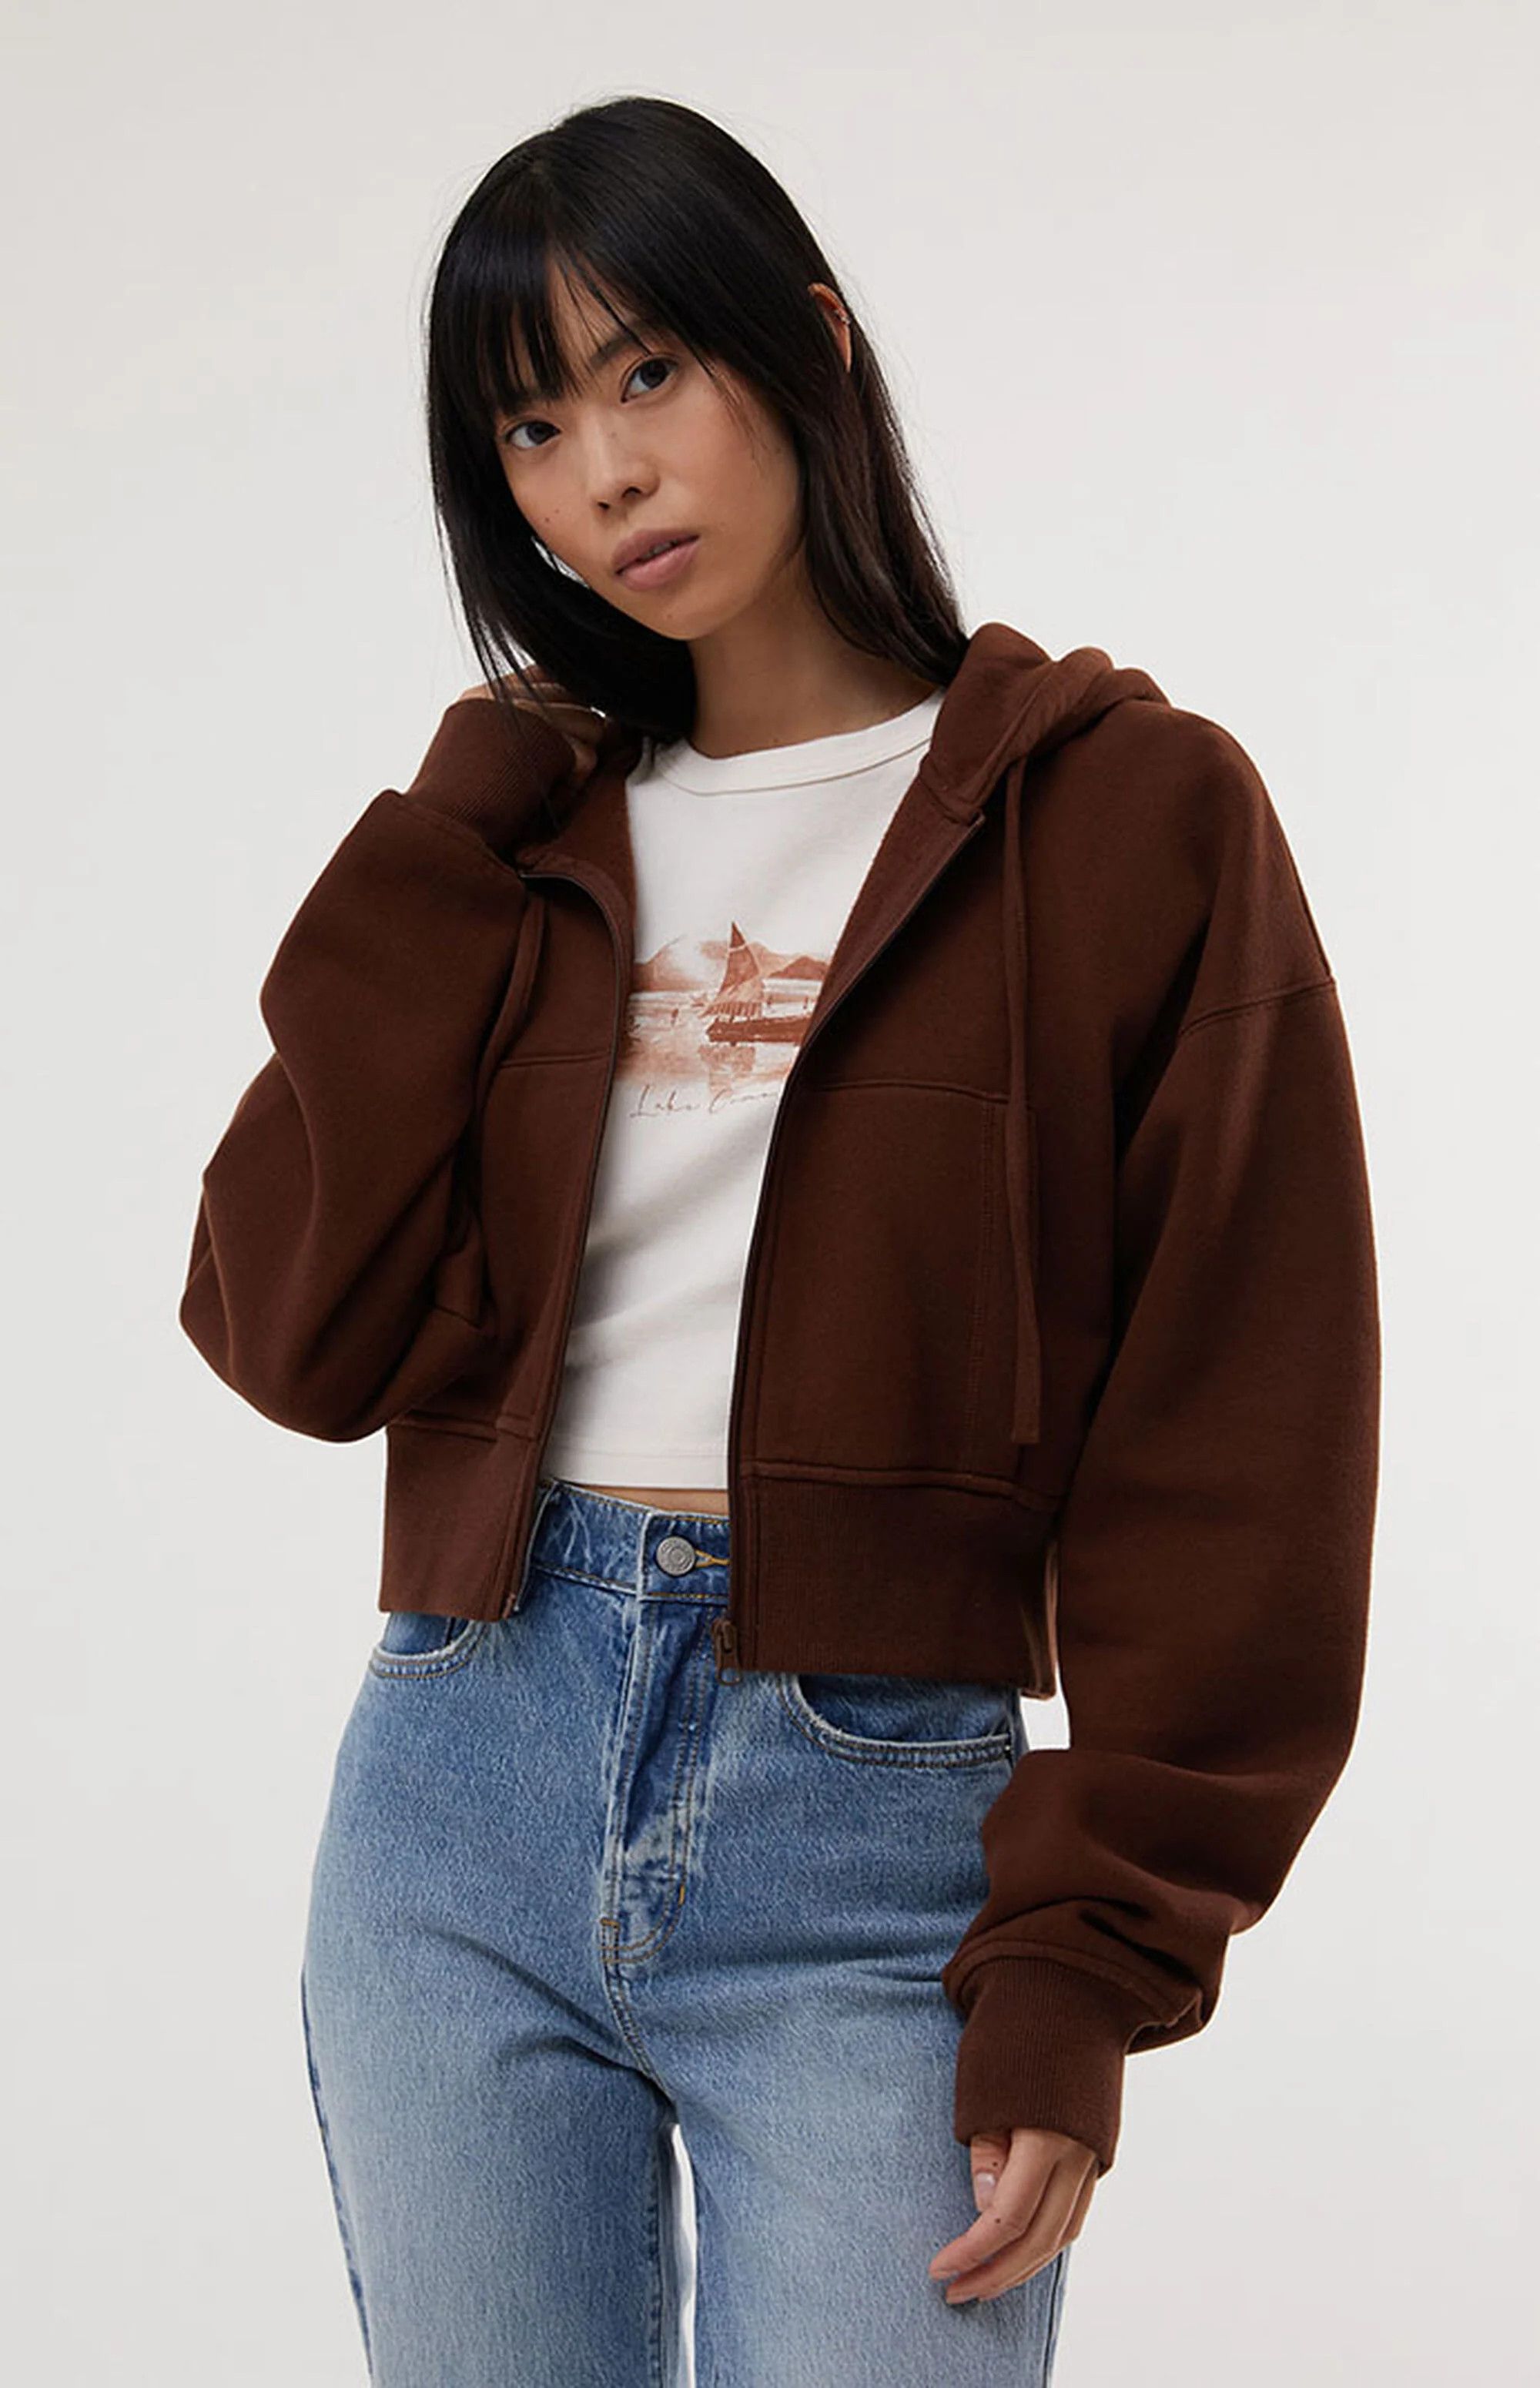 PacSun Kaley Cropped Full Zip Hoodie | PacSun